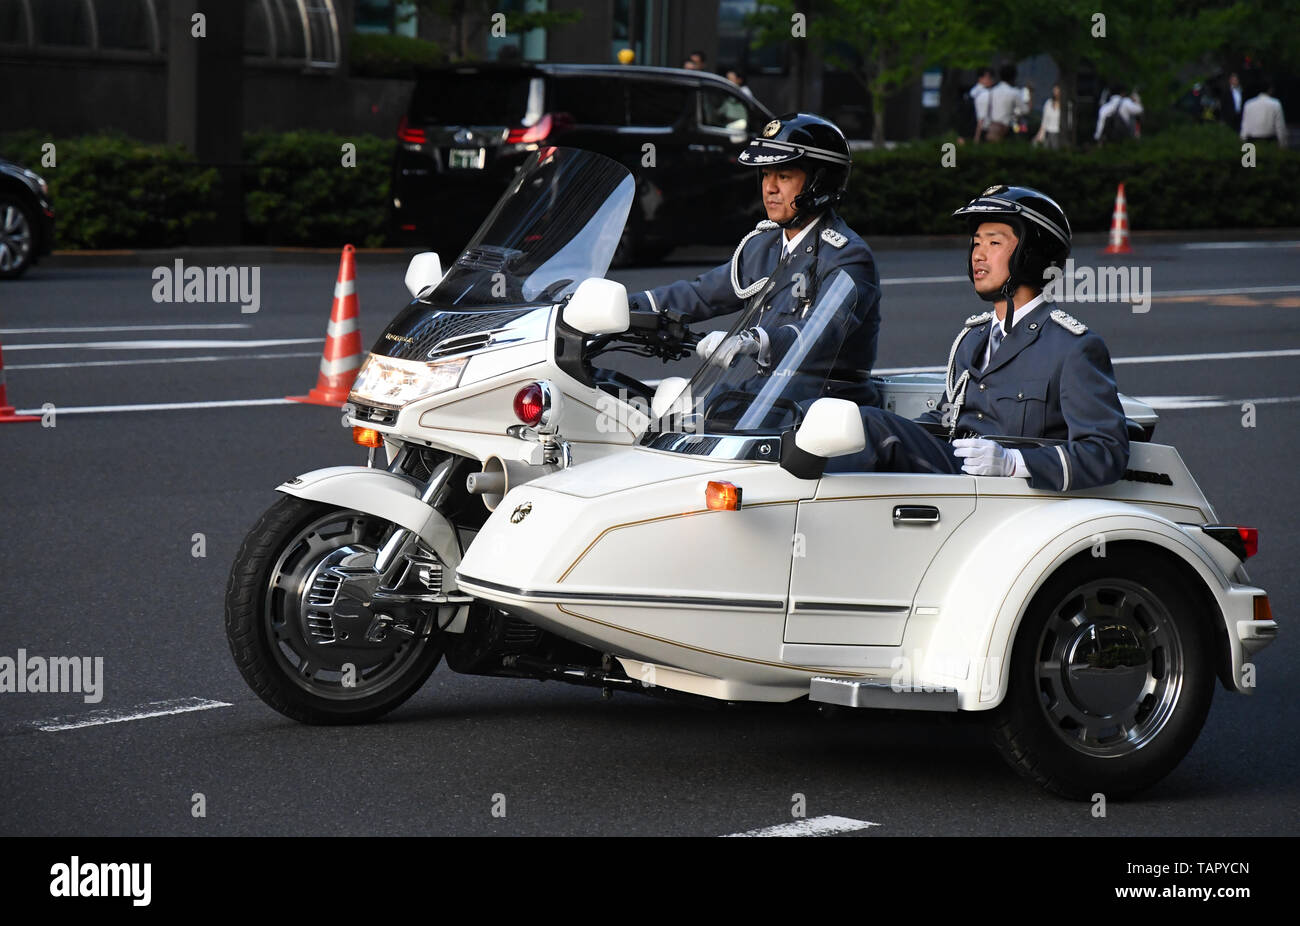 Tokyo, Japan. 27th May, 2019. A Tokyo Police motorcycle with a sidecar passenger awaits outside the Imperial Palace Hotel in Tokyo to escort the US President Donald Trump during his visit to Japan. Photo taken on May 27, 2019. Photo by: Ramiro Agustin Vargas Tabares Credit: Ramiro Agustin Vargas Tabares/ZUMA Wire/Alamy Live News